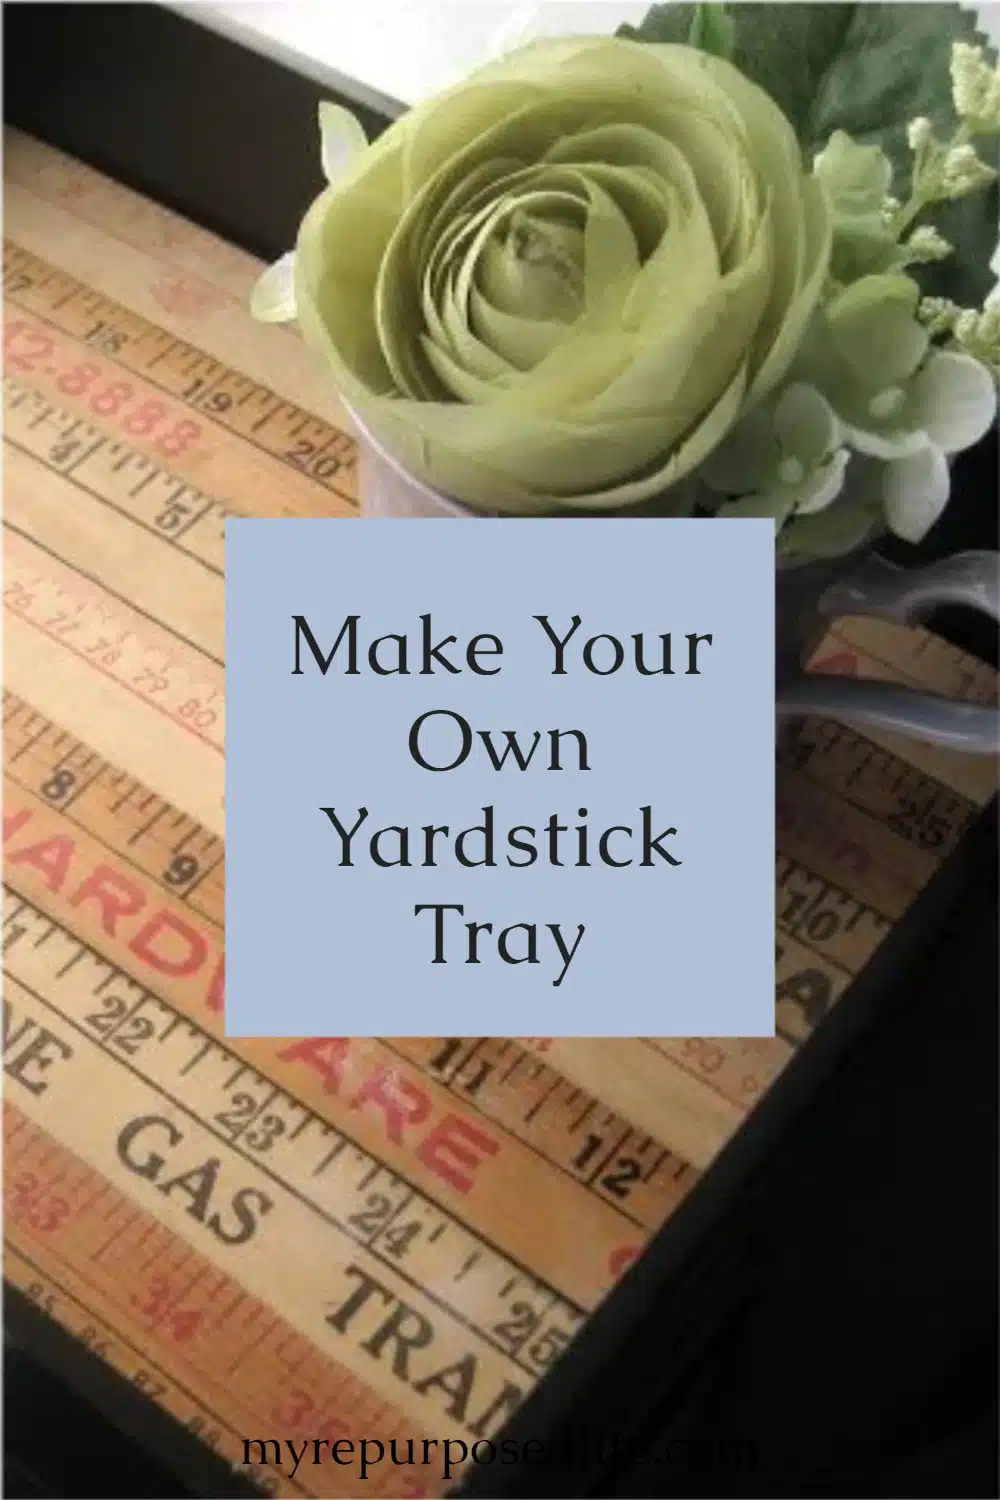 How to make a great yardstick tray by Little Nostalgia. Easy project to make from thrift store yardsticks. Step by step directions. #littlenostalgia #MyRepurposedLife #yardstick #diy #project #tray via @repurposedlife